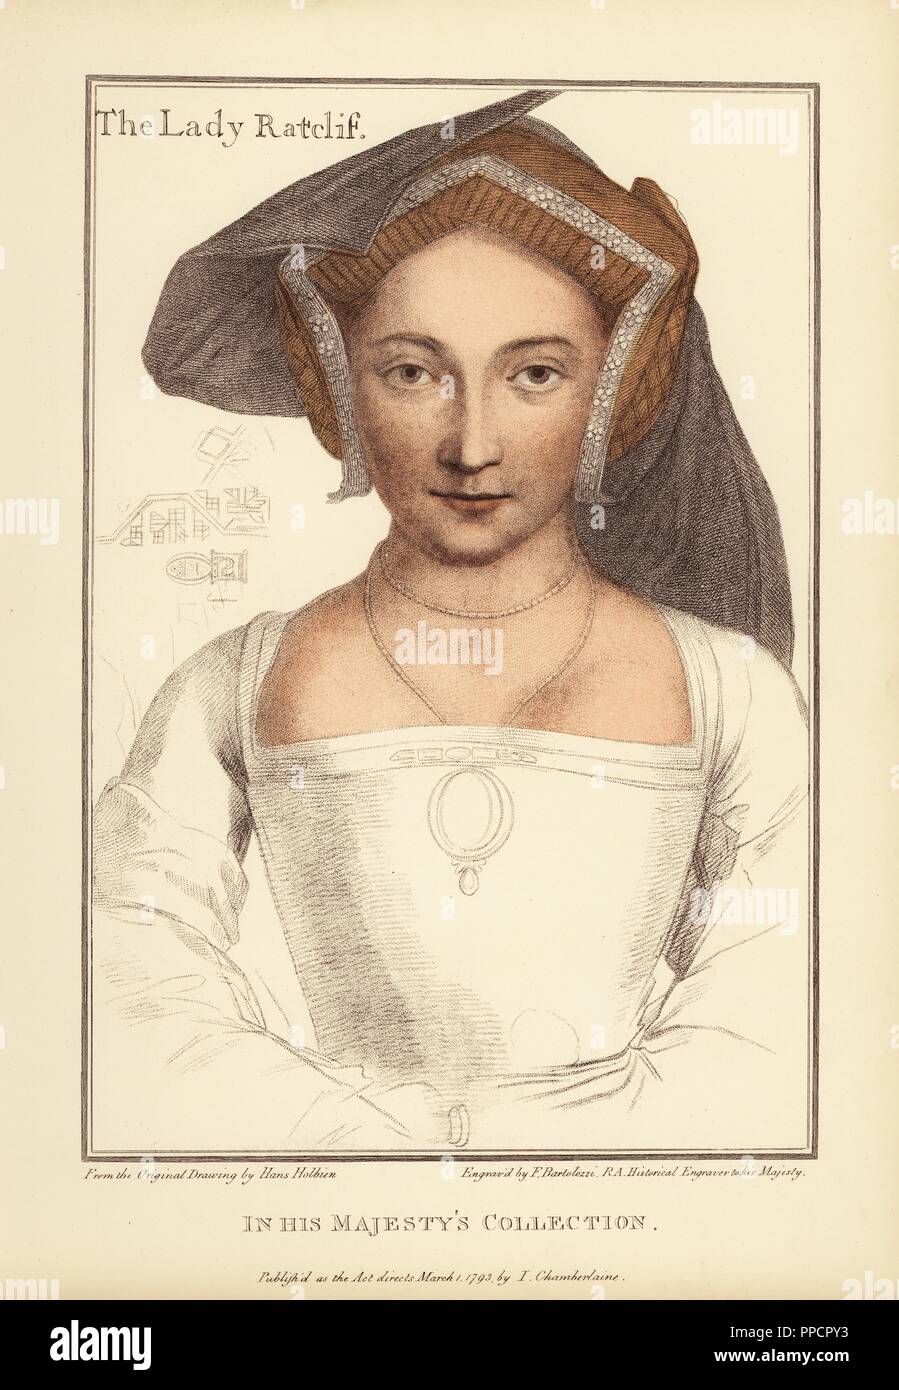 The Lady Ratclif, wife of Robert, 1st Earl of Sussex of the Ratcliffes. Probably the erudite Mary Arundell (d.1557), only child of Sir John Arundell of Cornwall. Handcoloured copperplate engraving by Francis Bartolozzi after Hans Holbein from Facsimiles of Original Drawings by Hans Holbein, Hamilton, Adams, London, 1884. Stock Photo